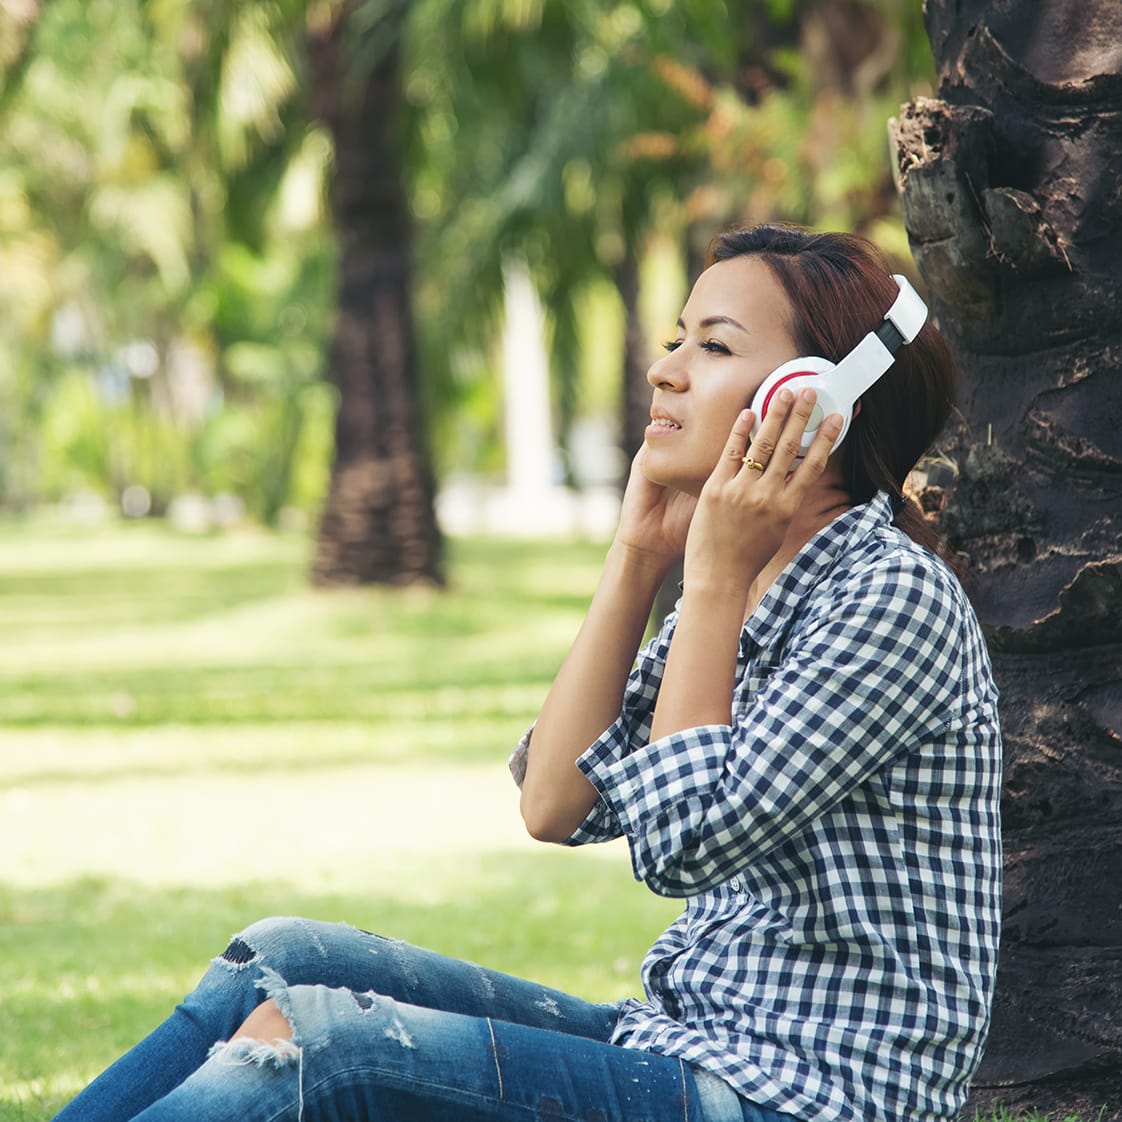 Young woman wearing headphones, sitting by a tree in a park, enjoying music with closed eyes and a relaxed expression.